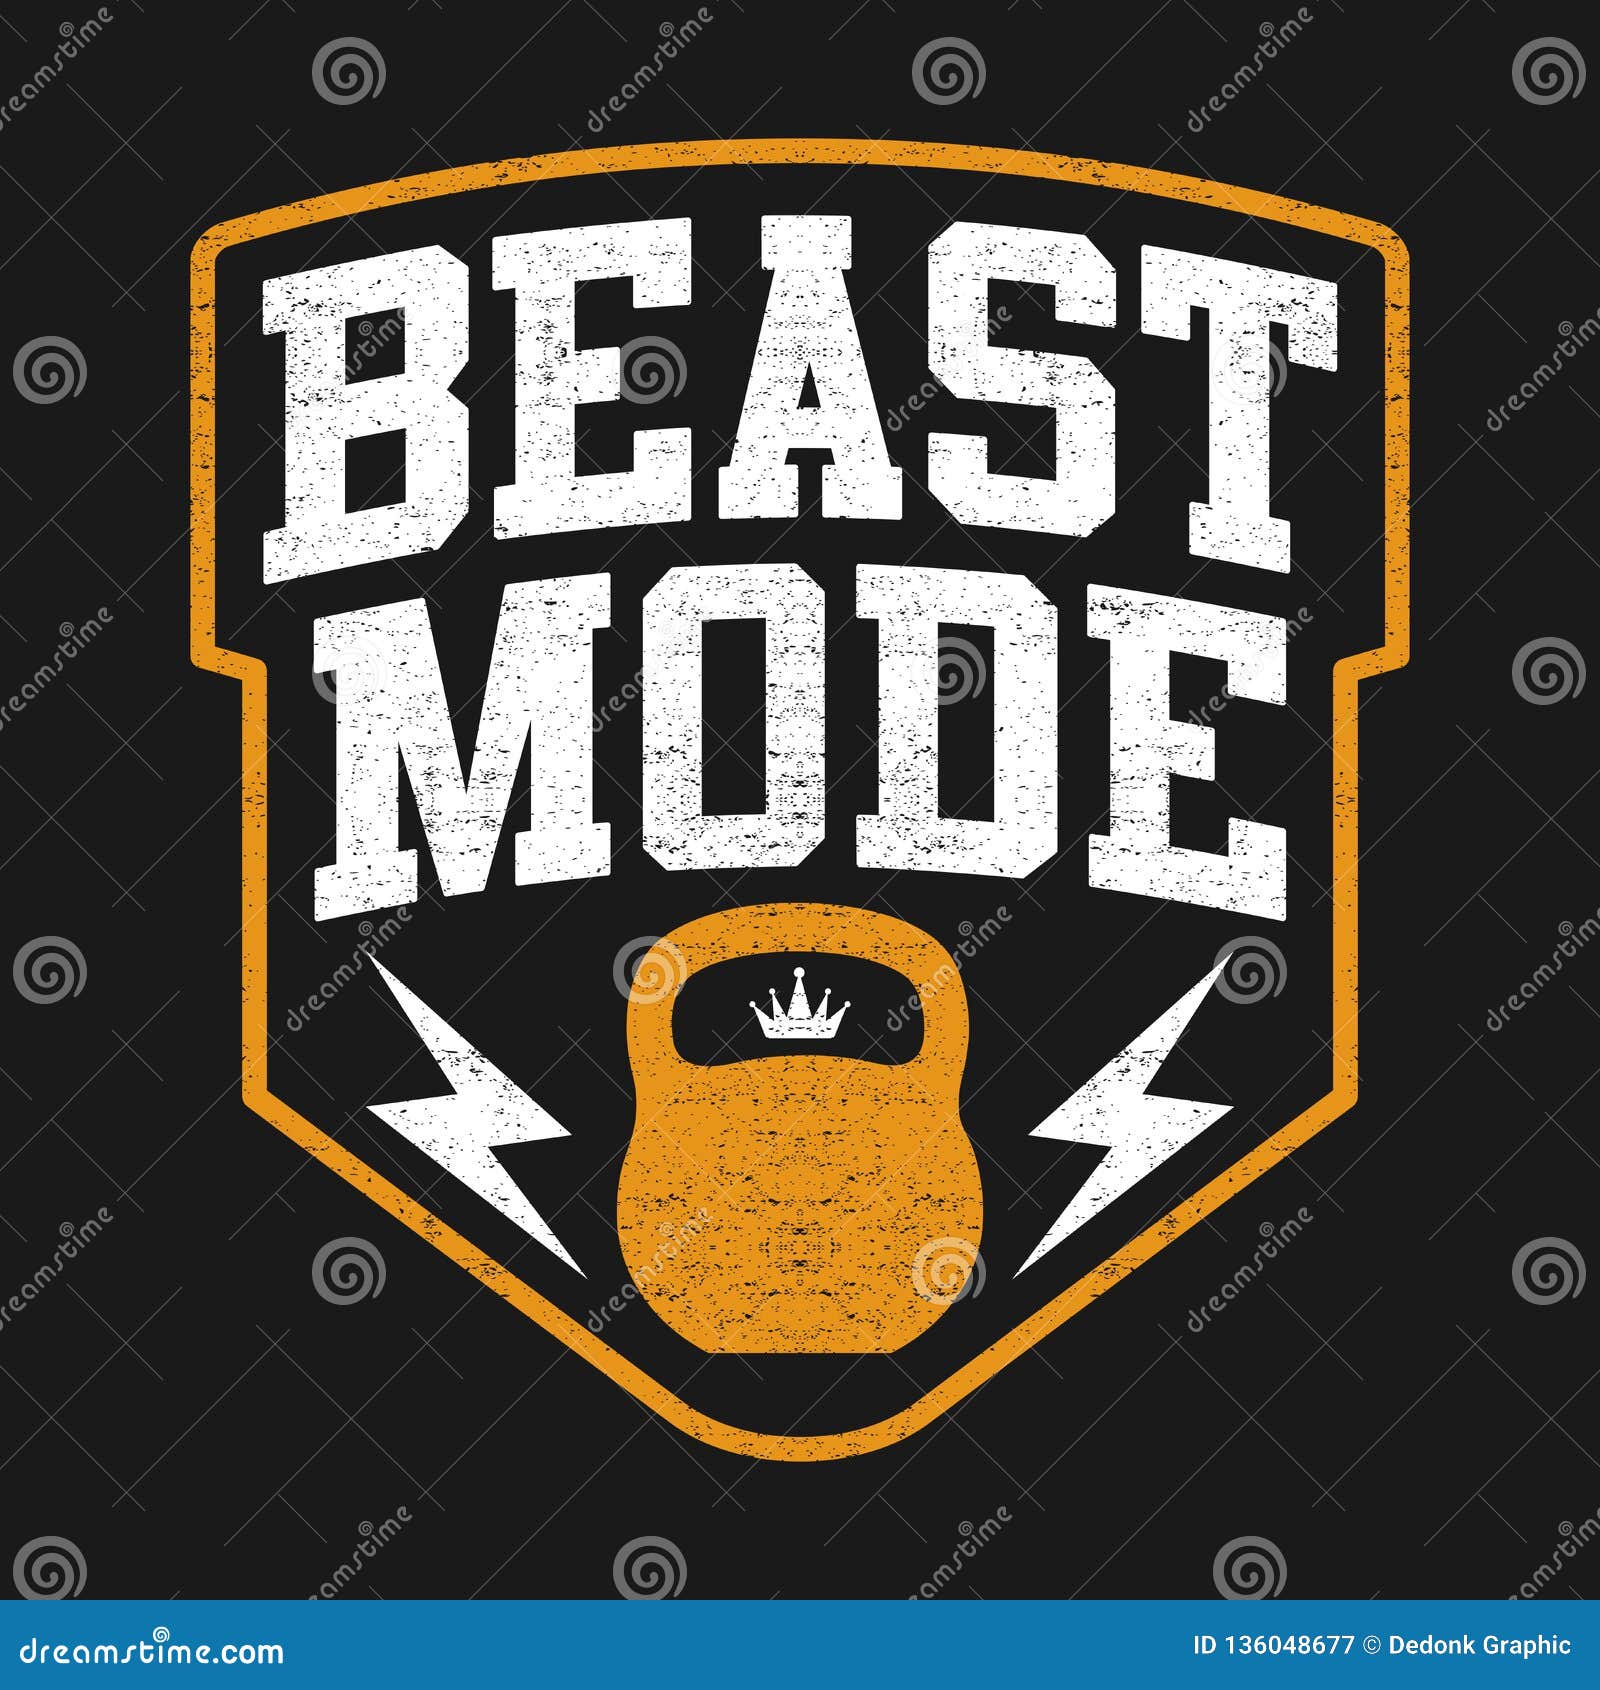  sport theme with text beast mode